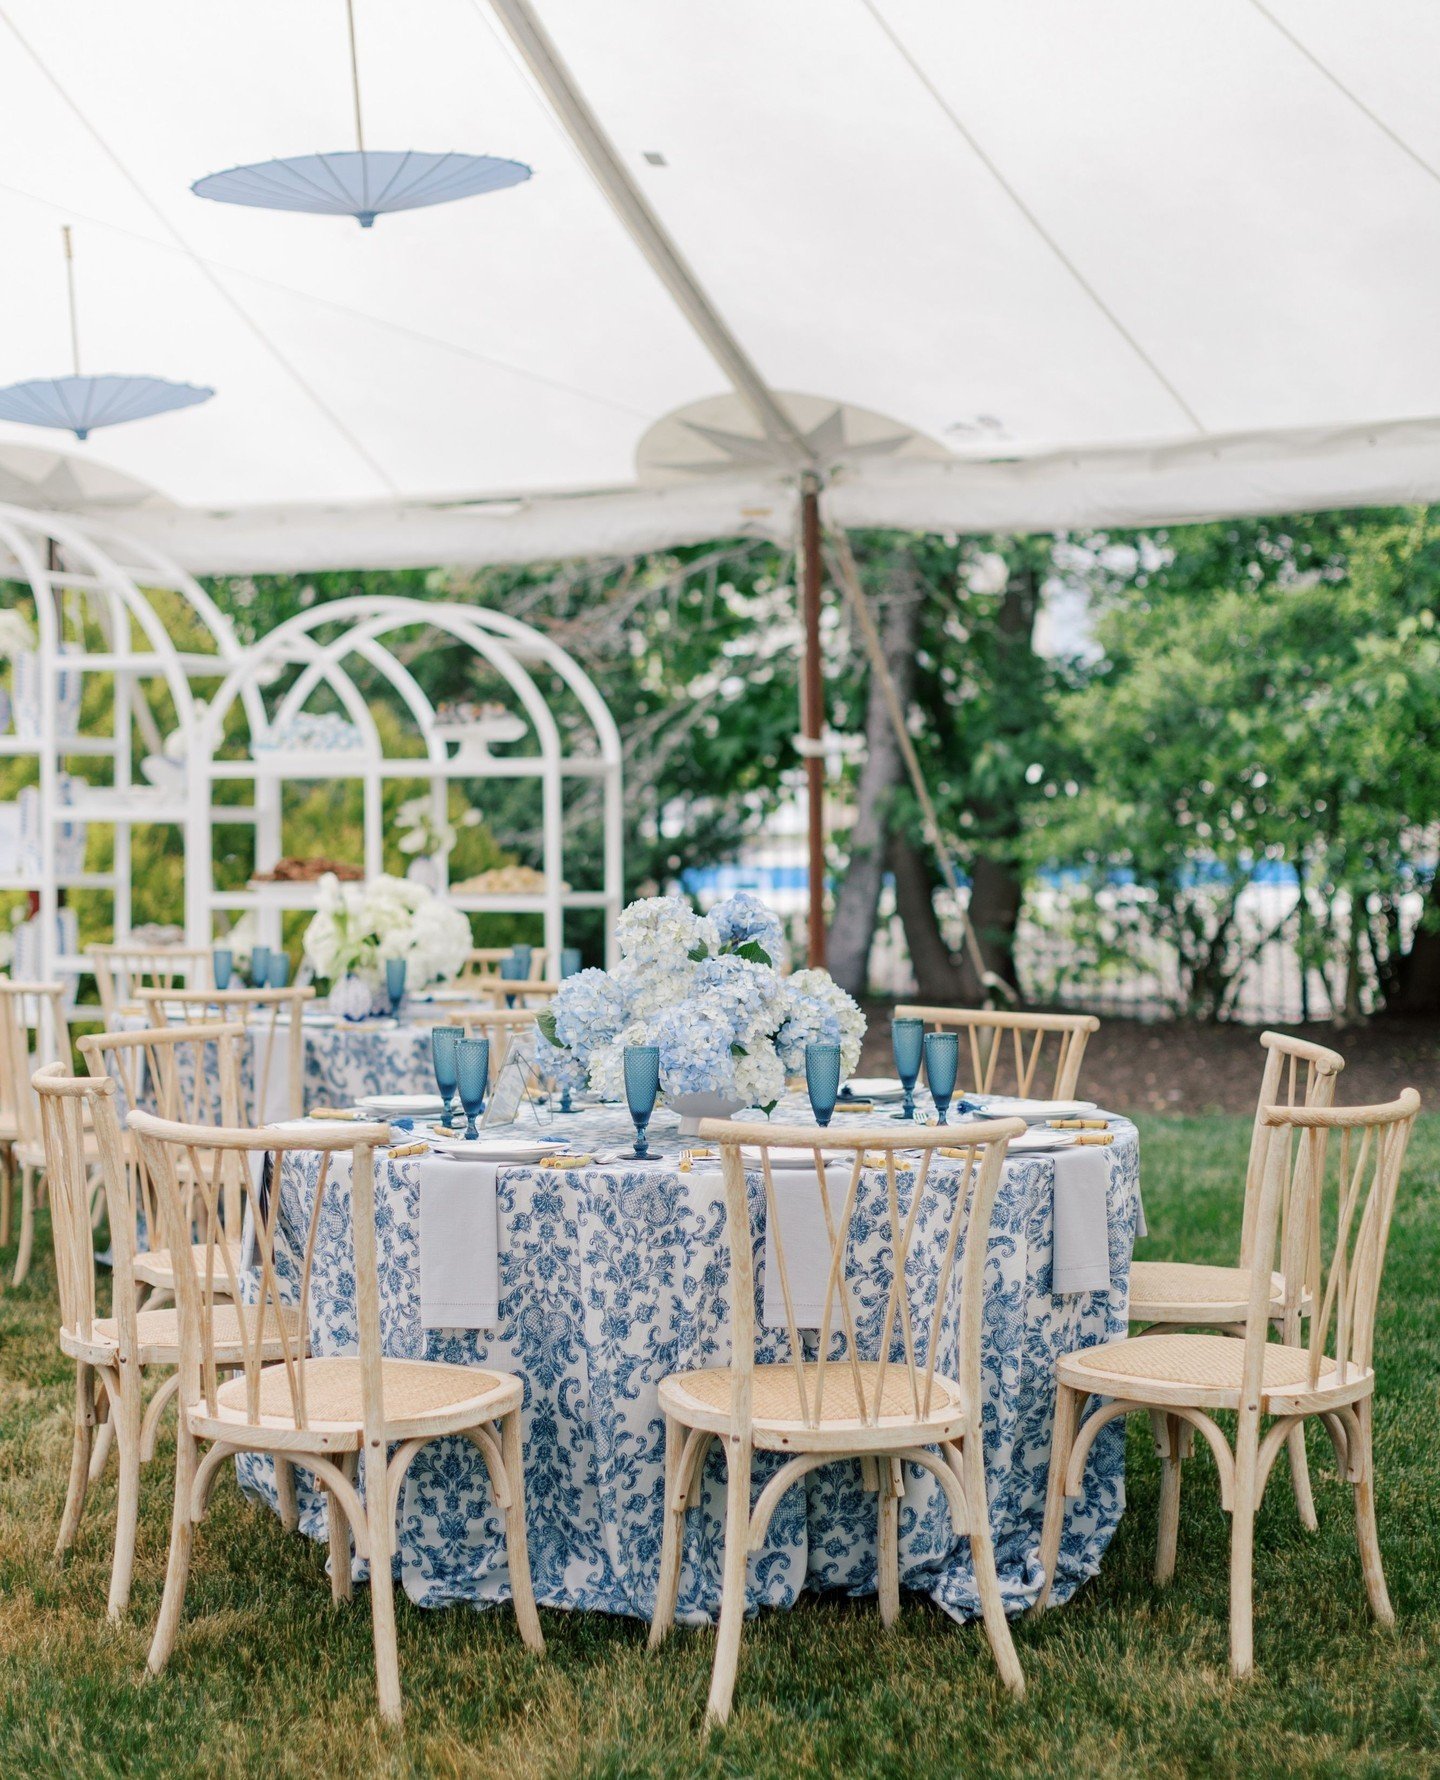 This spring weather has us dreaming of outdoor celebrations, which makes it the perfect time to look back on the charming details inside this tented backyard baby shower.⁠ ⁠
⁠
Photography: @hopehelmuthweddings⁠
Planning / Design / Florals / Branding: